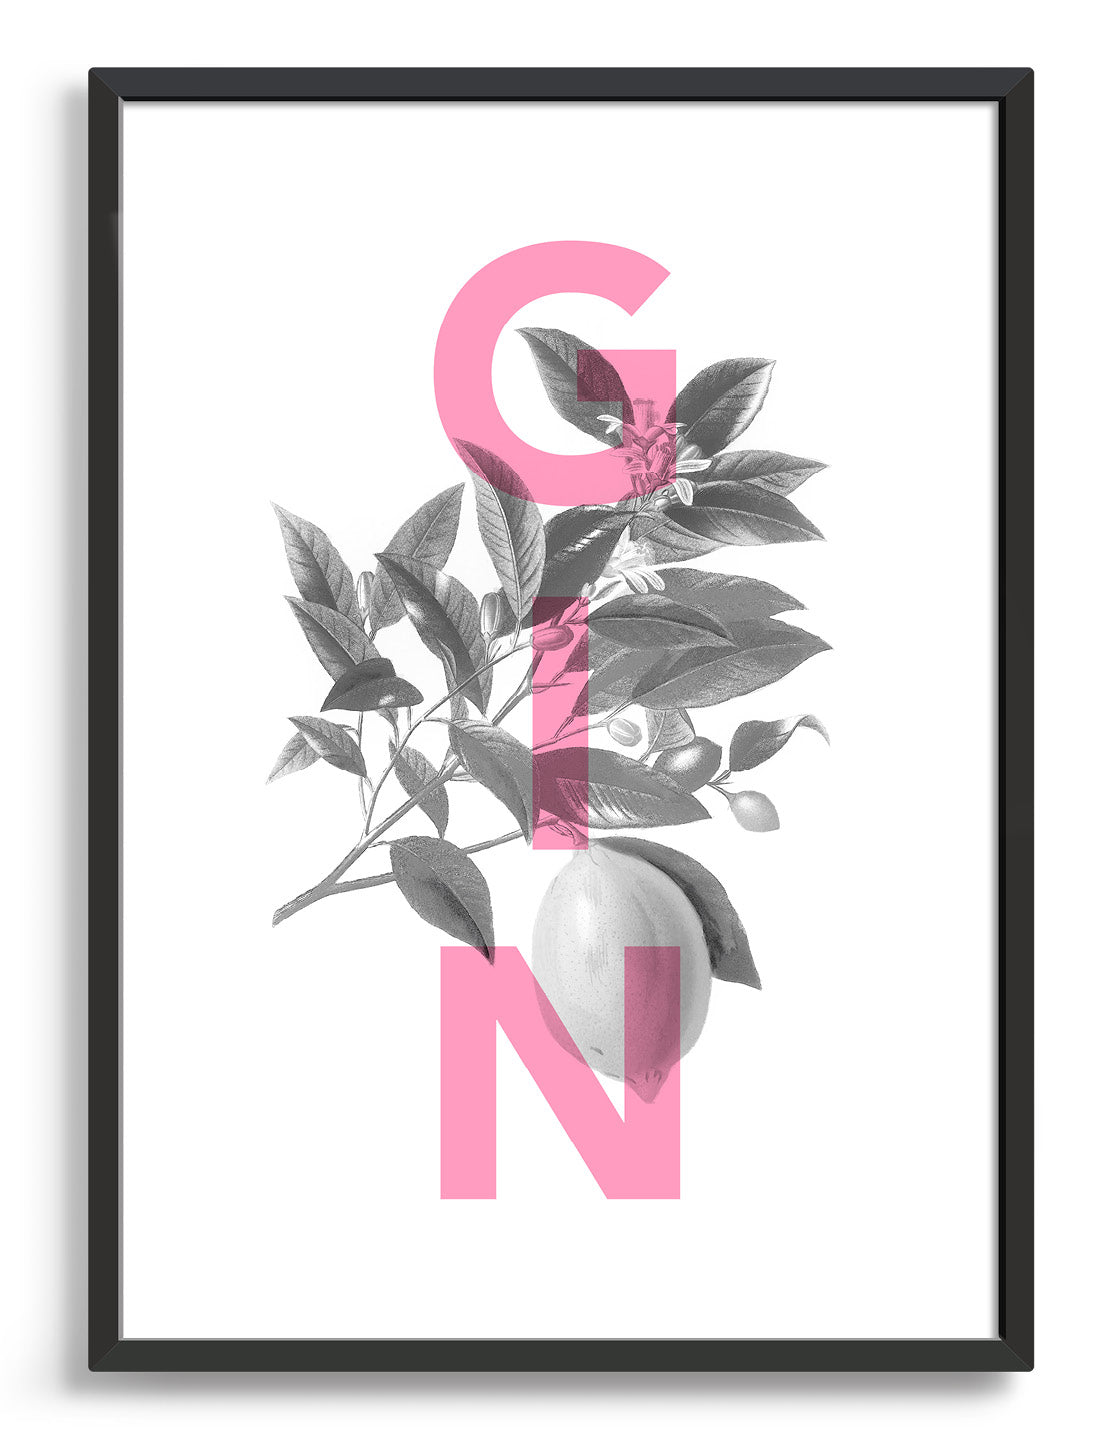 Gin typography print with monochrome botanical archive drawing and pink GIN wording